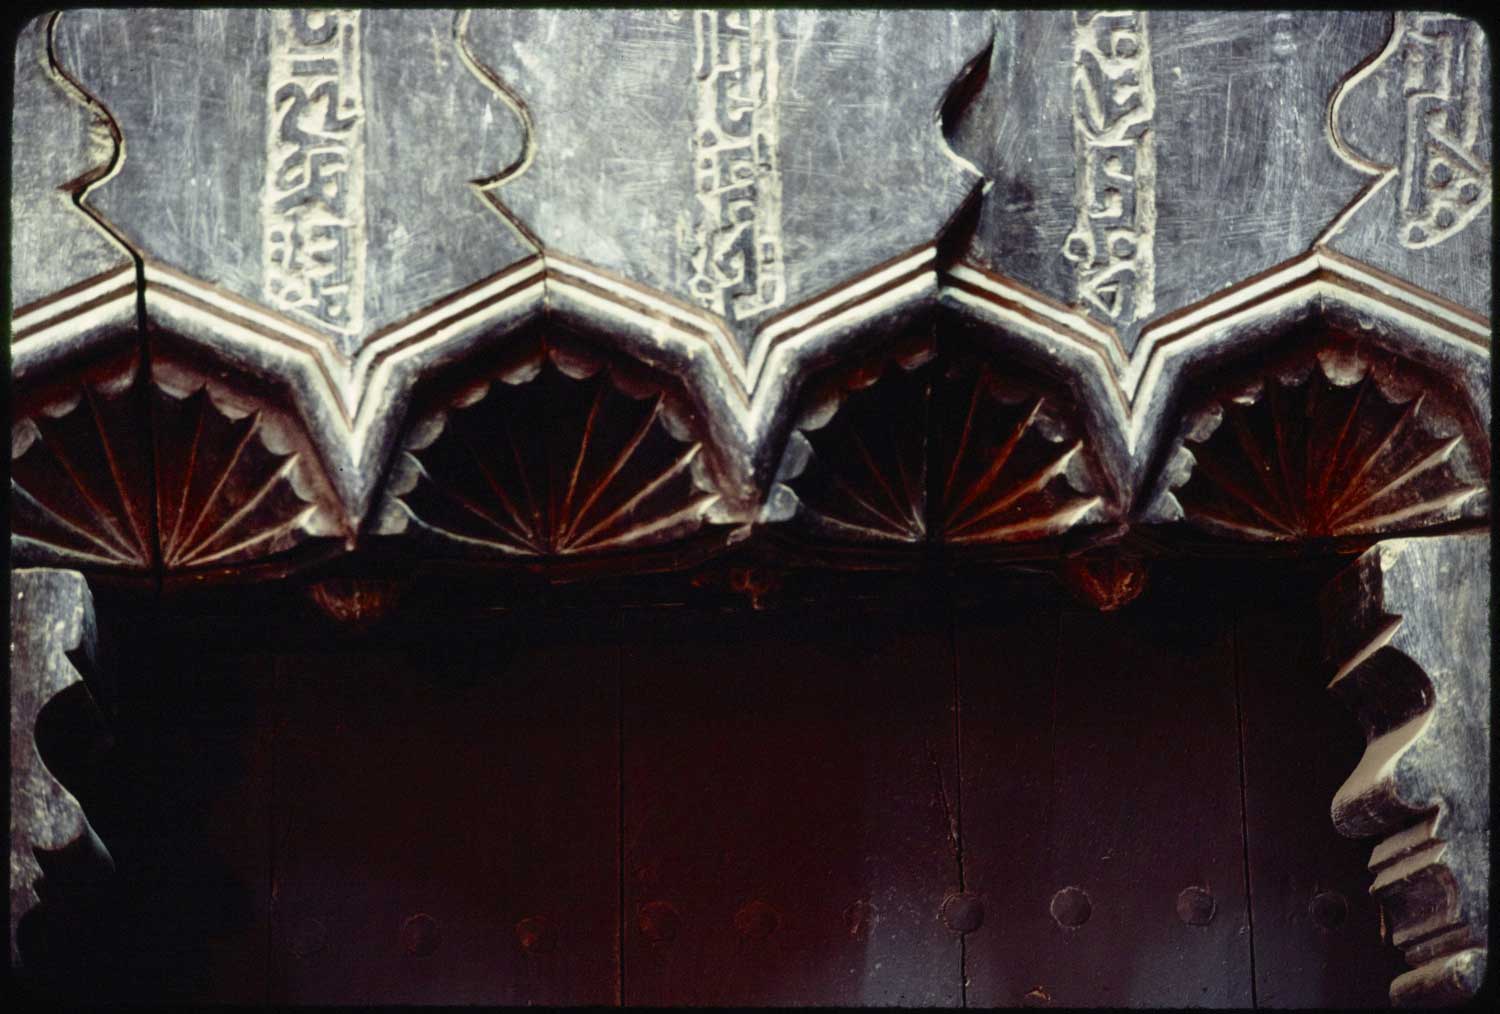 Detail of palmettes and Syriac inscriptions on the northern exterior gate.